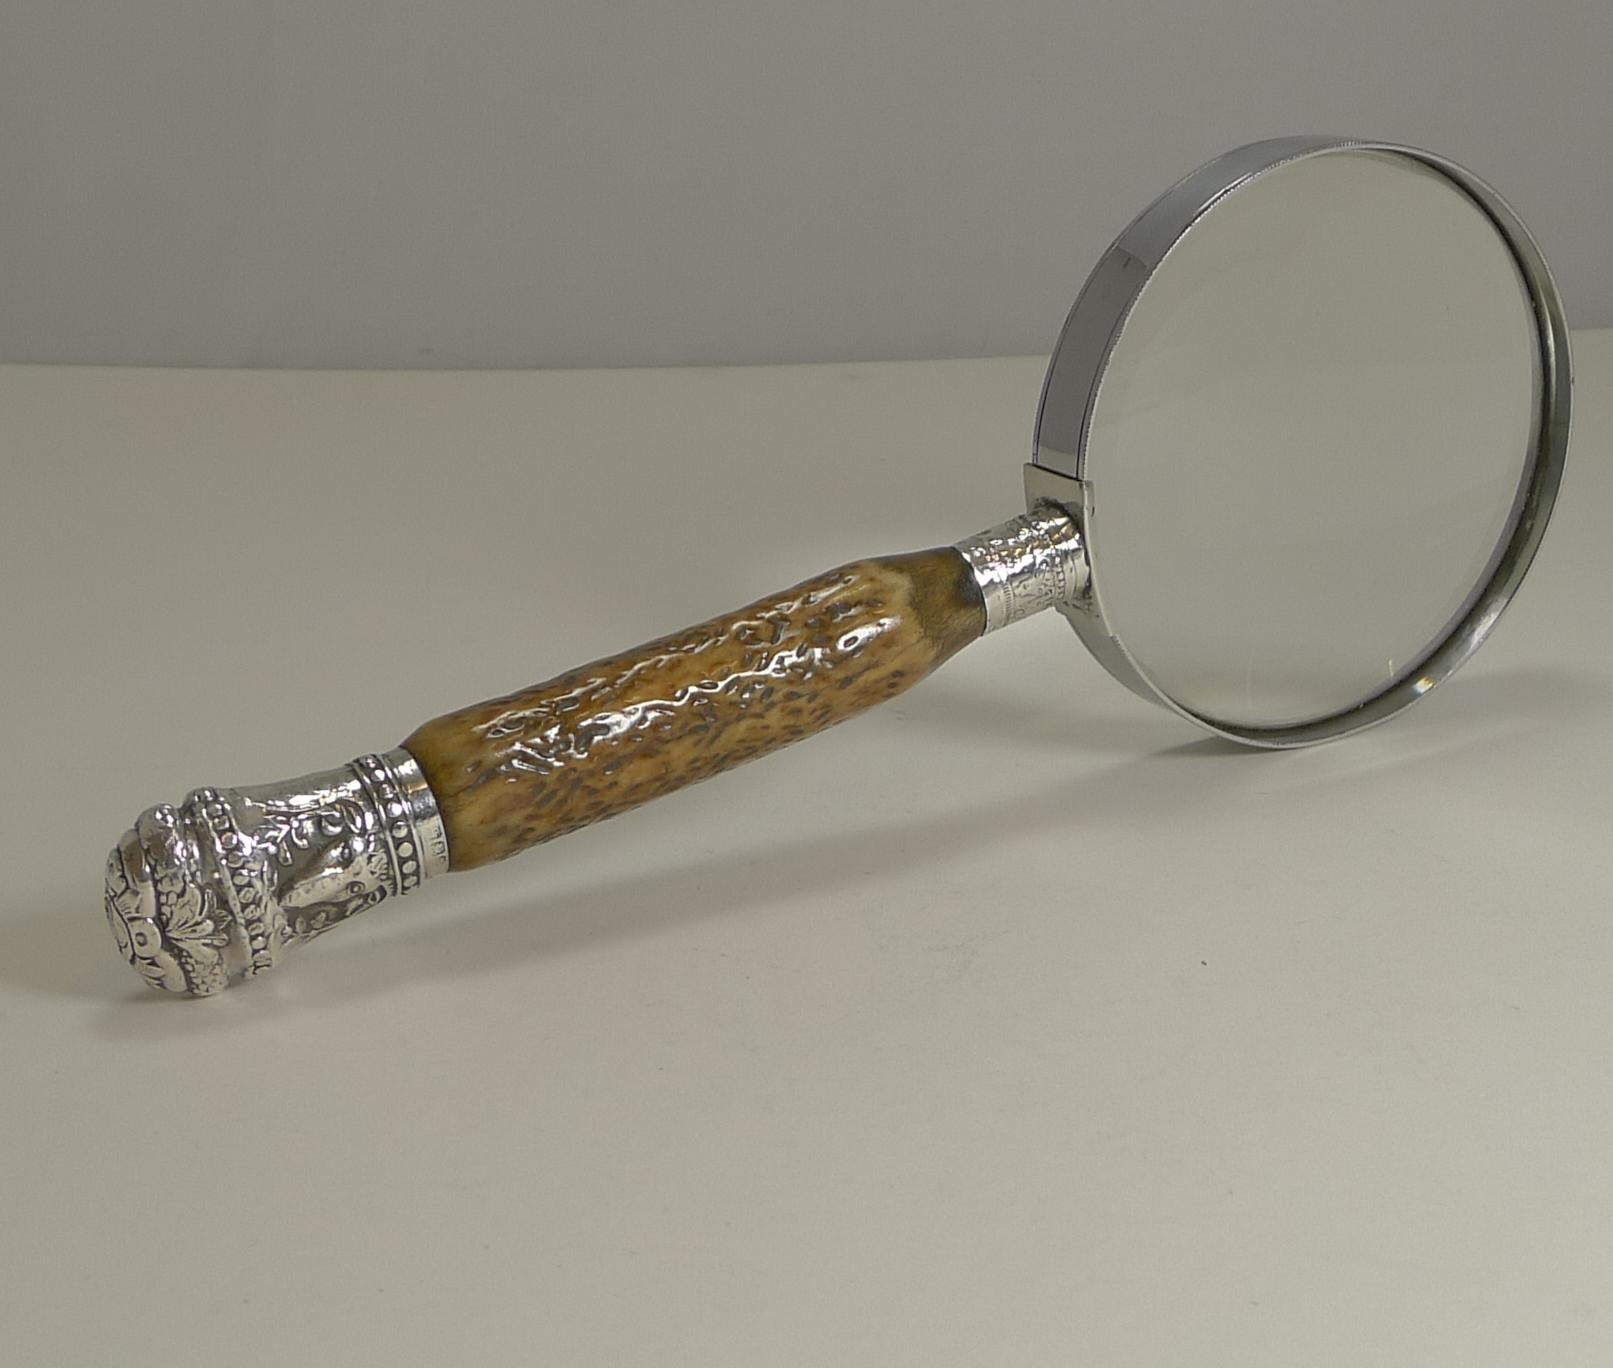 Antique English Antler Horn & Sterling Silver Handled Magnifying Glass 1